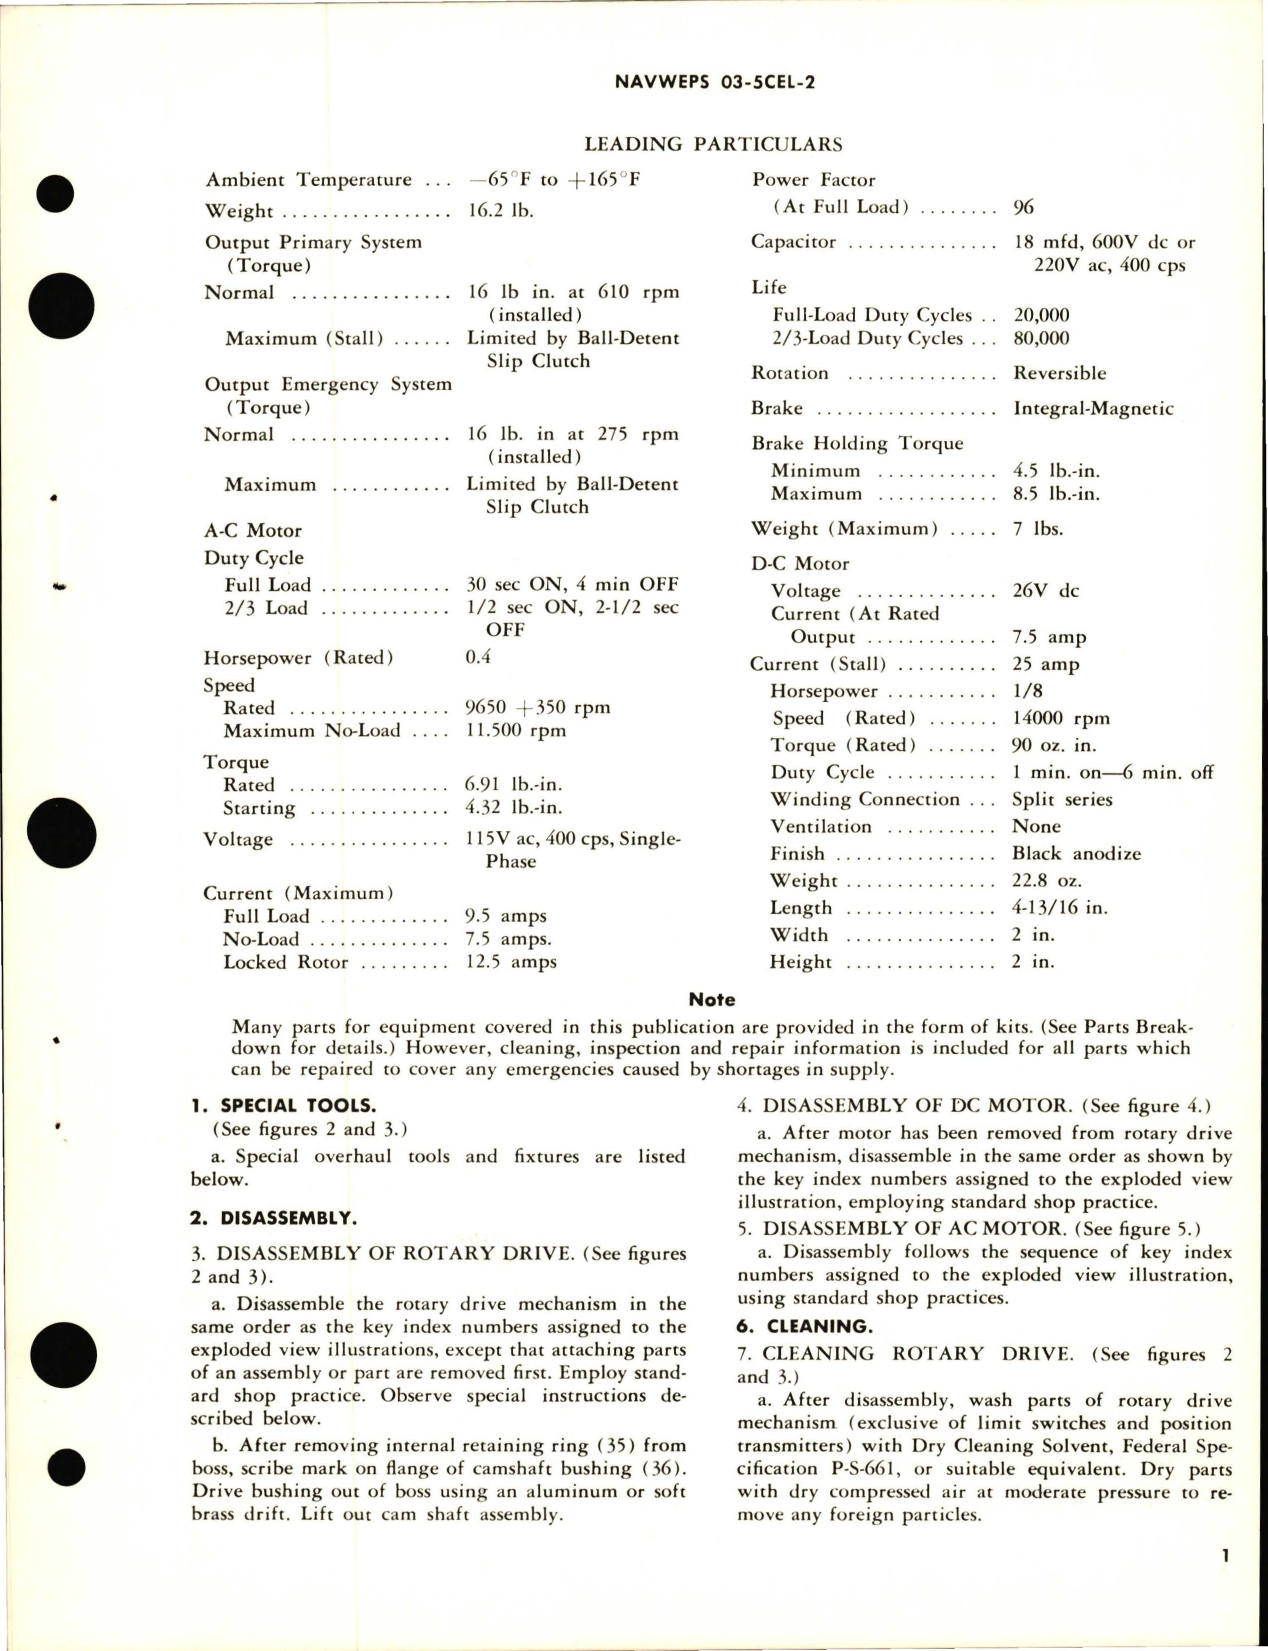 Sample page 5 from AirCorps Library document: Overhaul Instructions with Parts Breakdown for Gear Box, Motor Driven - Part A489-3